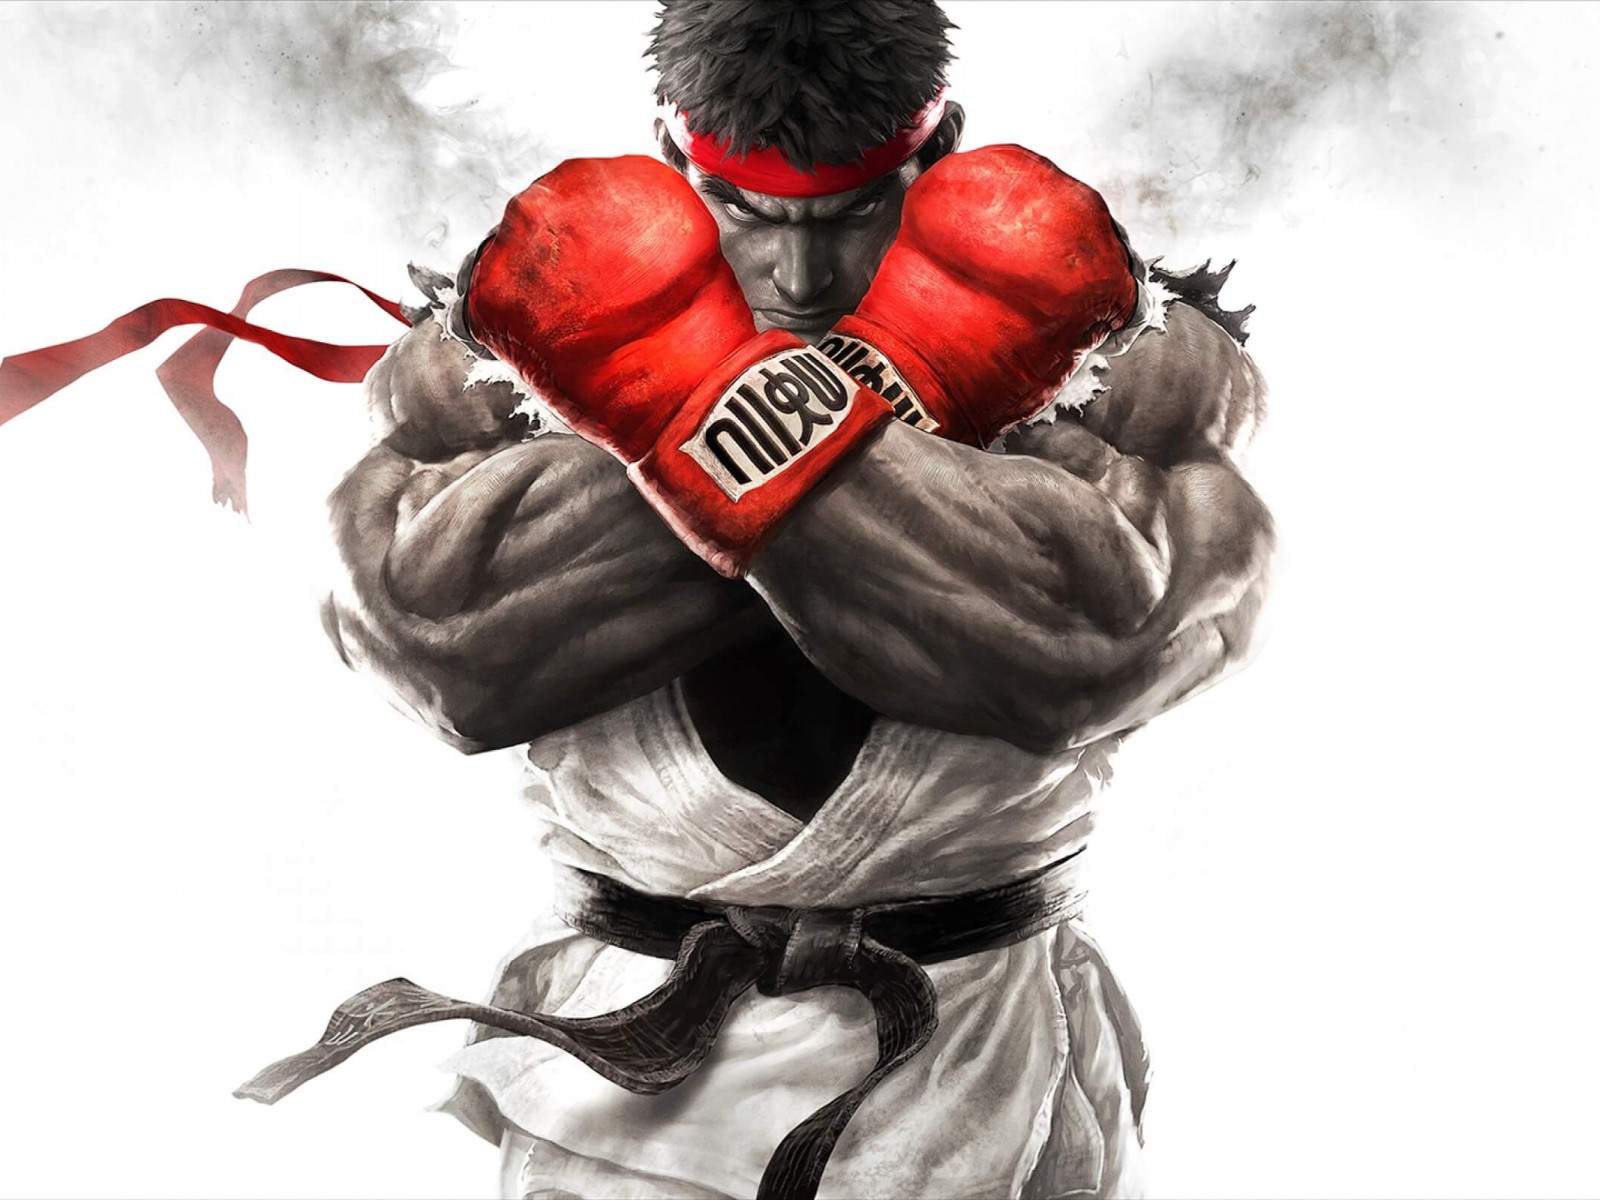 Ryu Street Fighter HD Wallpaper For X